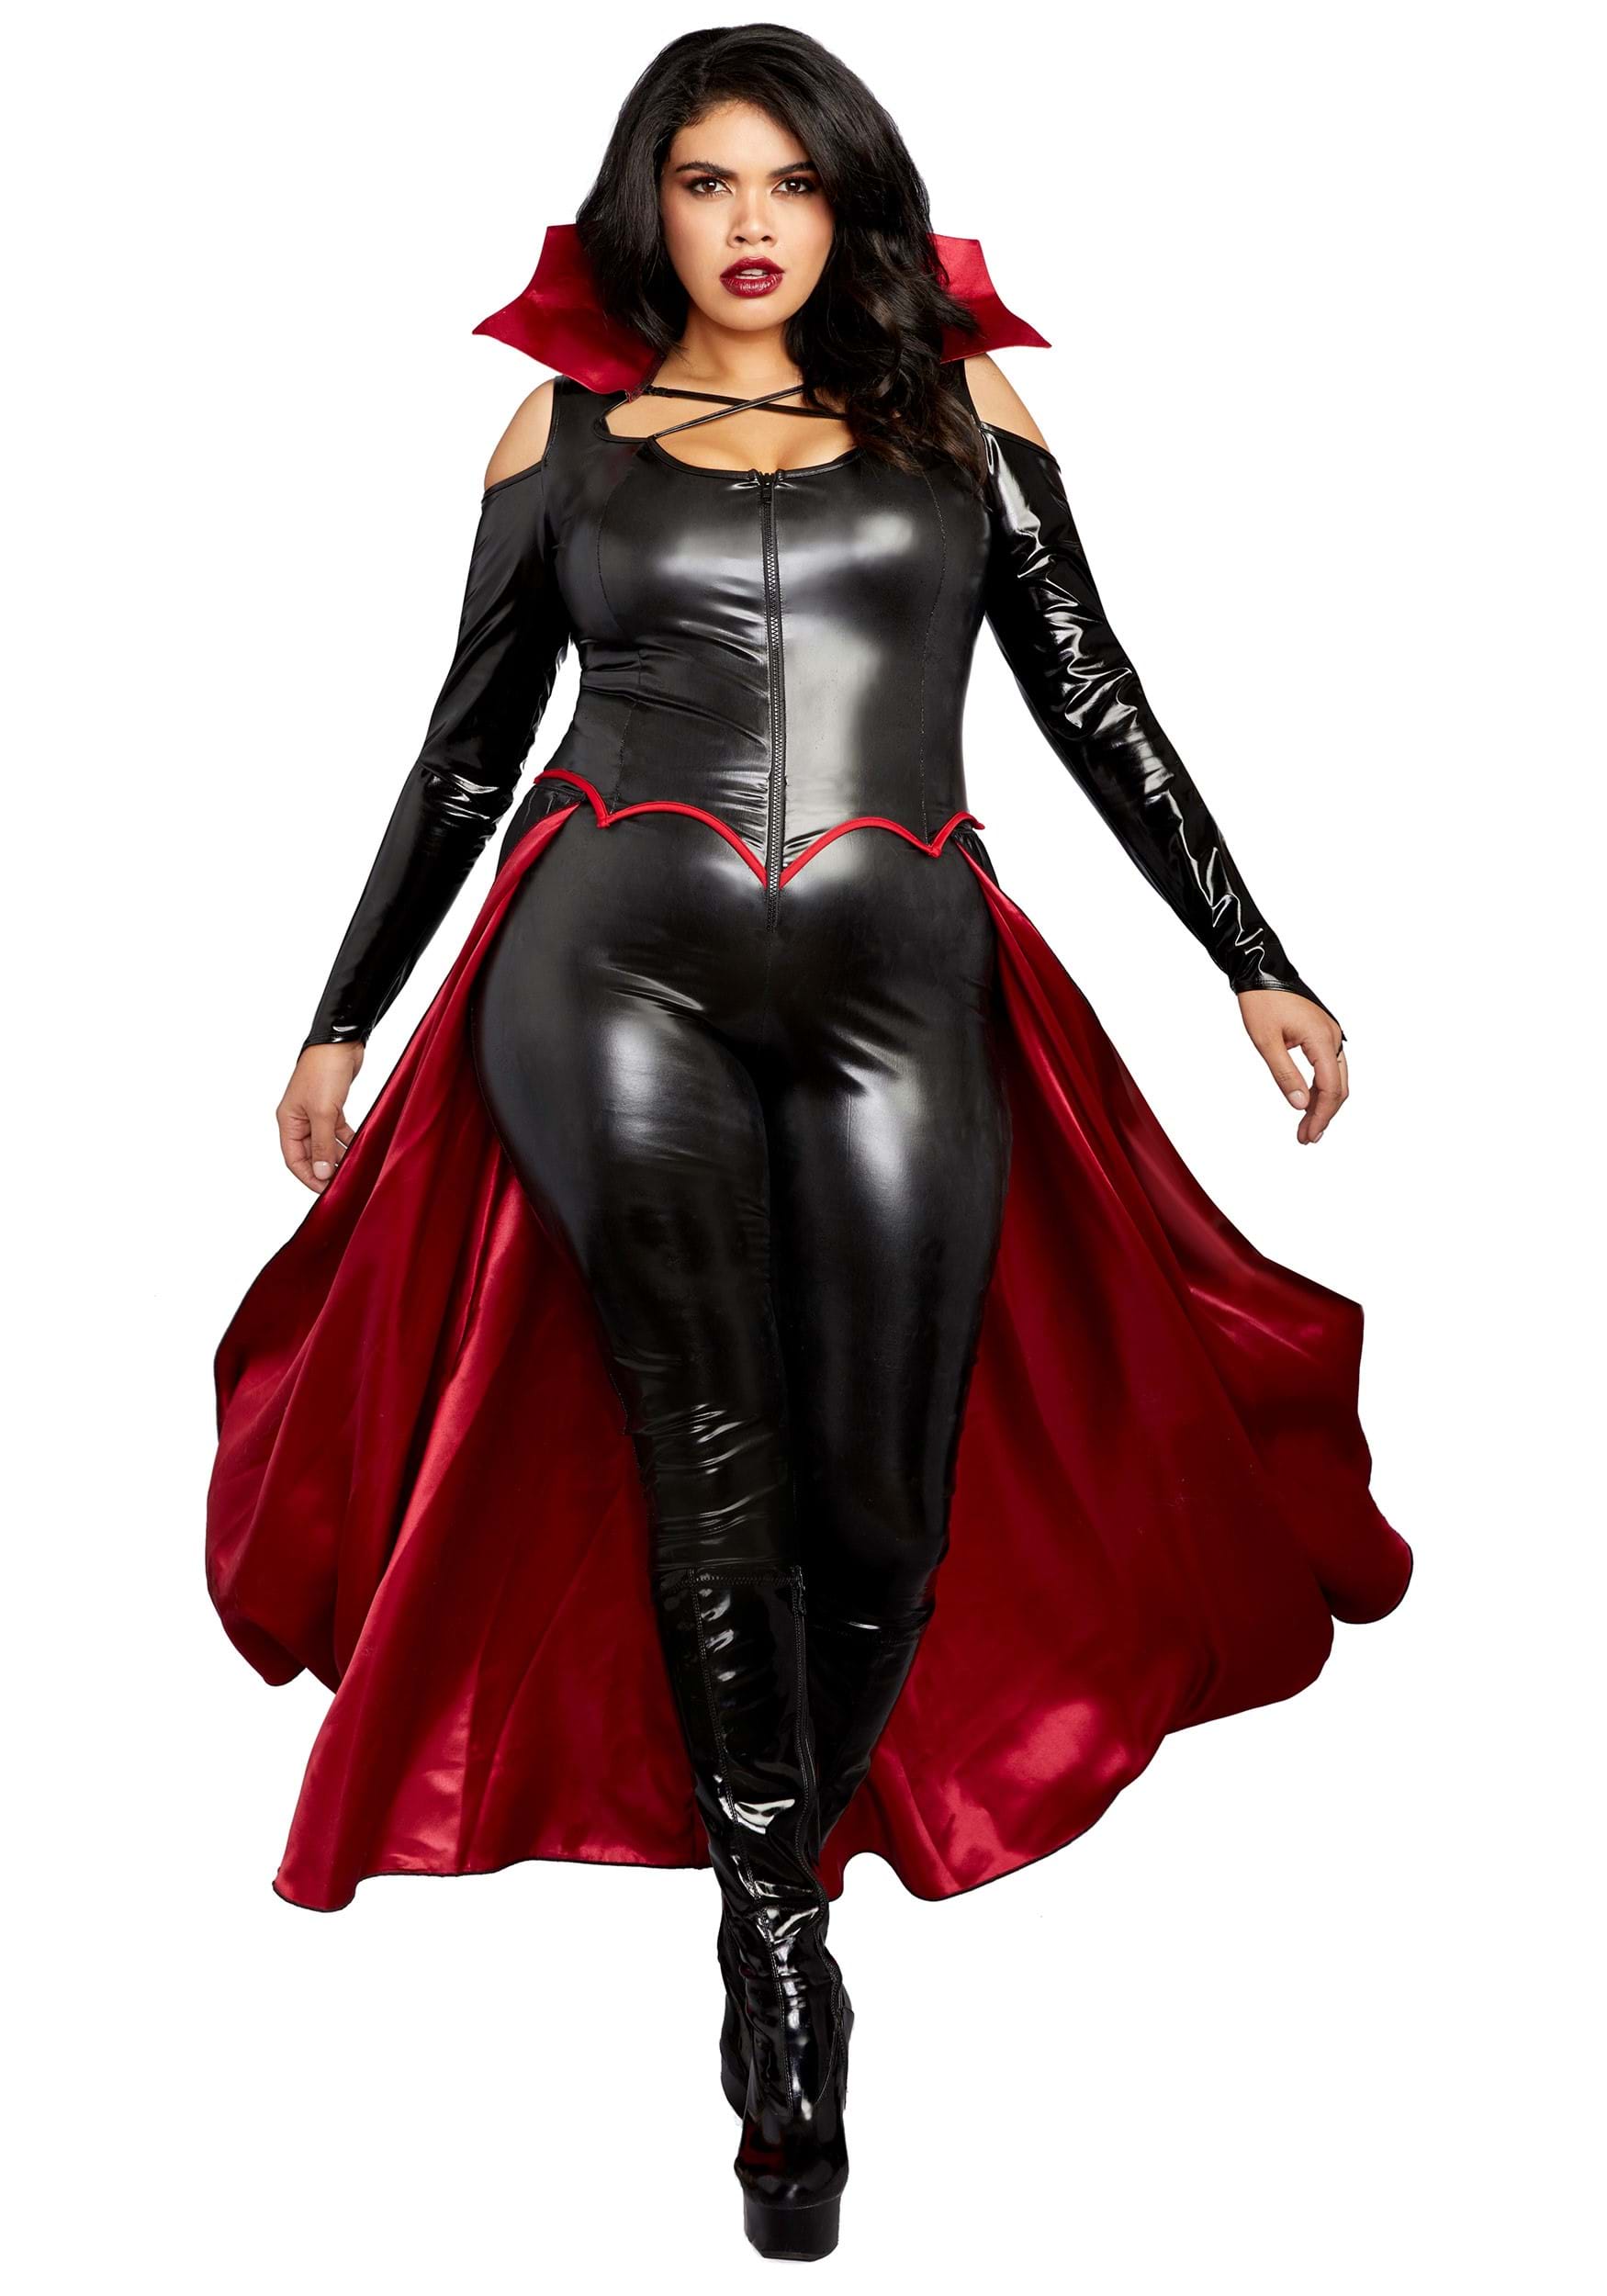 Plus Size Sexy Princess of Darkness Costume for Women